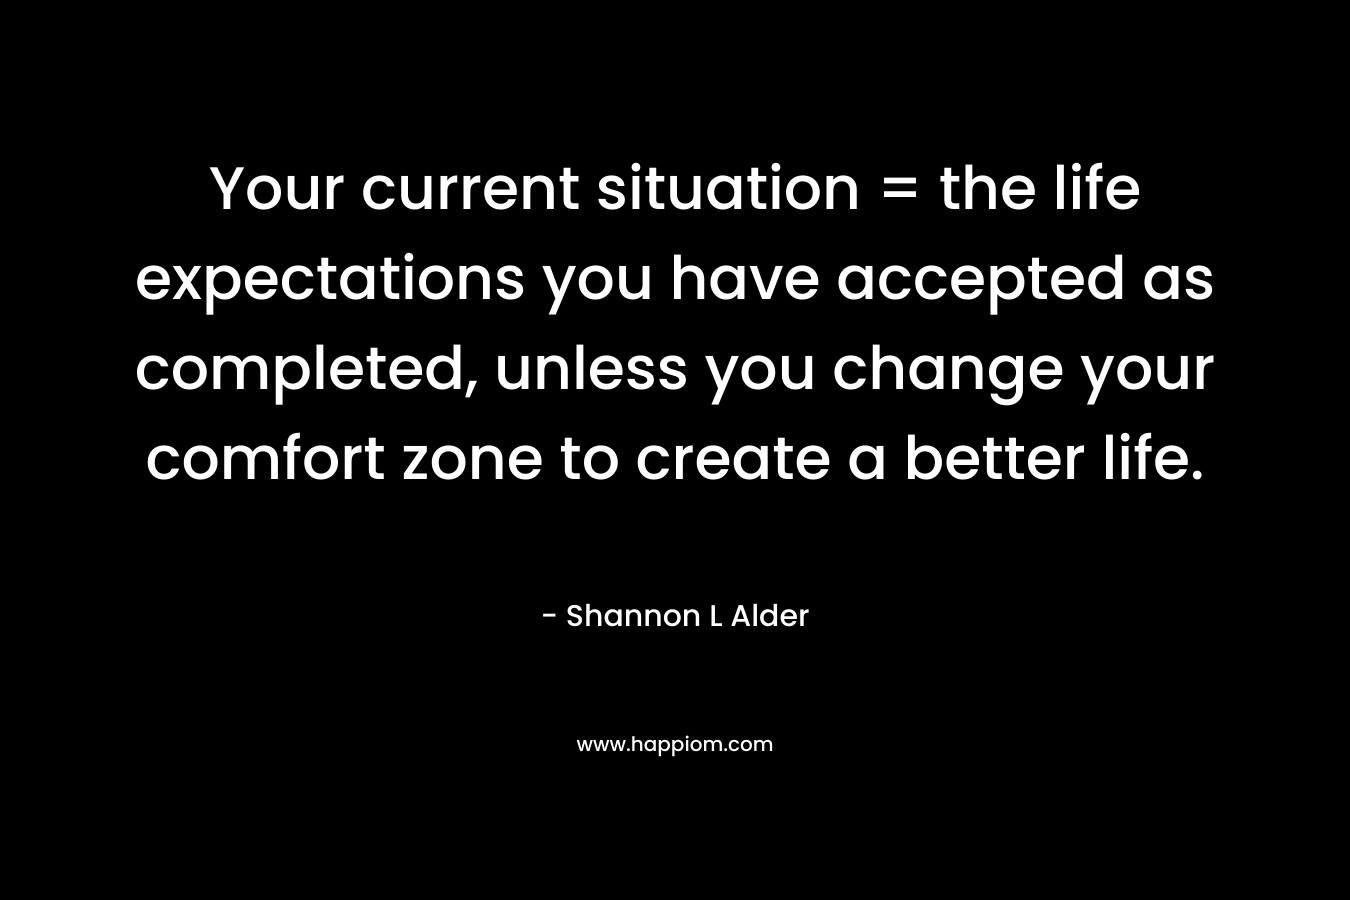 Your current situation = the life expectations you have accepted as completed, unless you change your comfort zone to create a better life. – Shannon L Alder